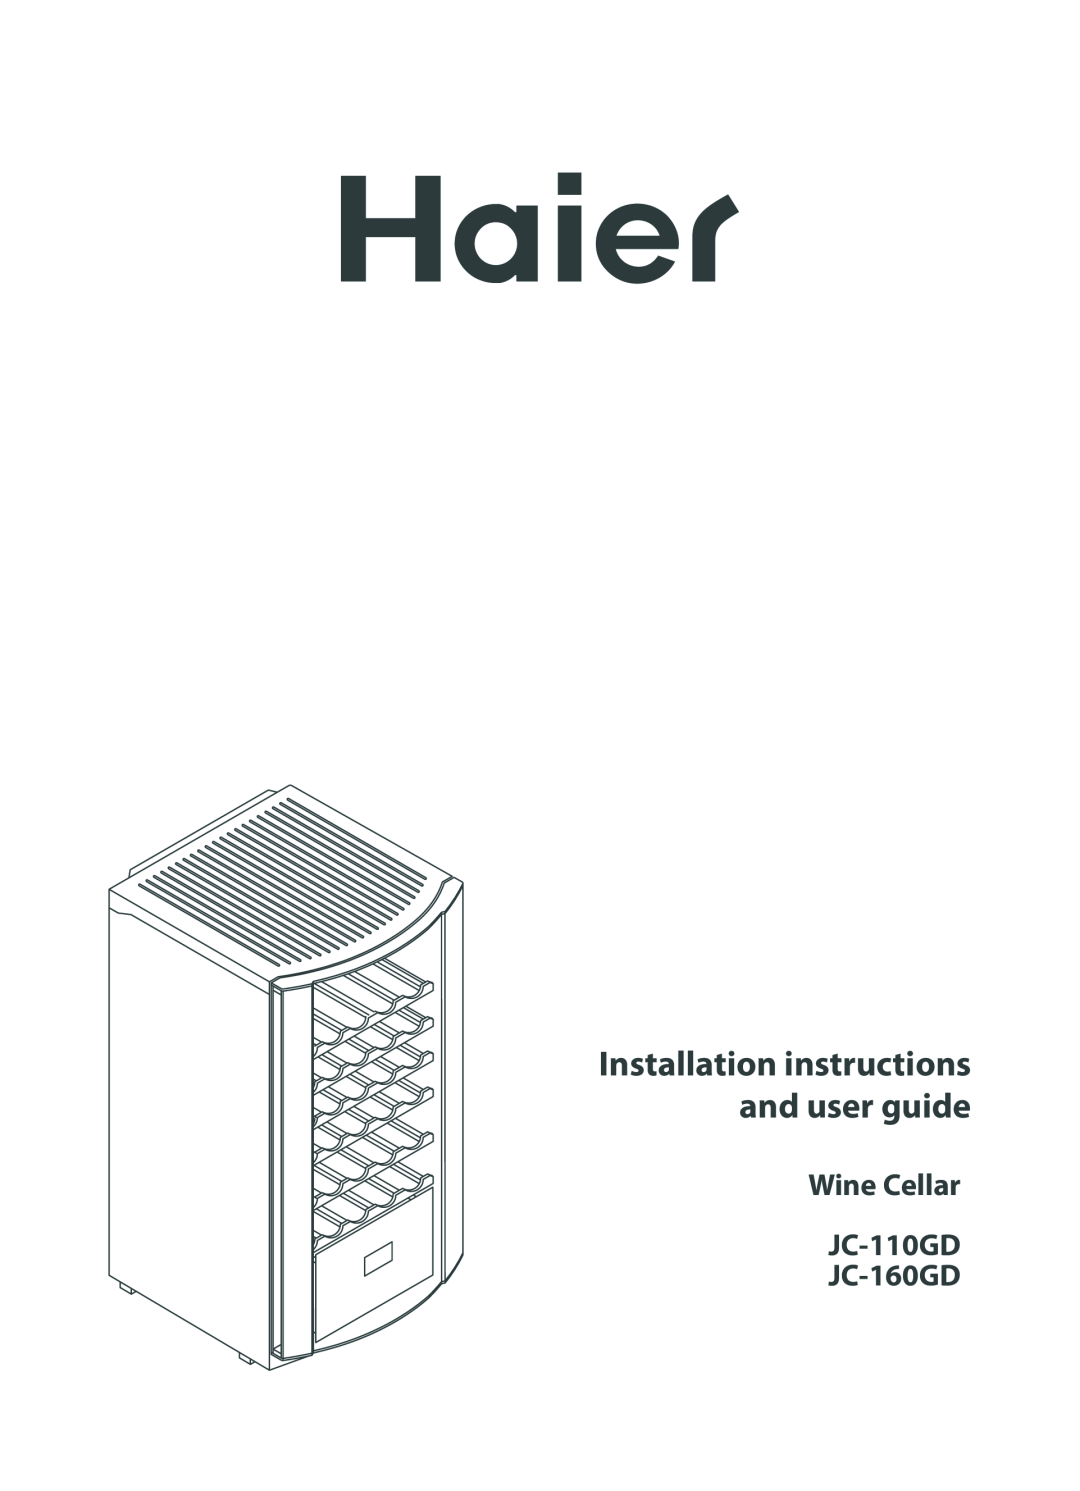 Haier manual Installation instructions and user guide, Wine Cellar JC-110GD JC-160GD 